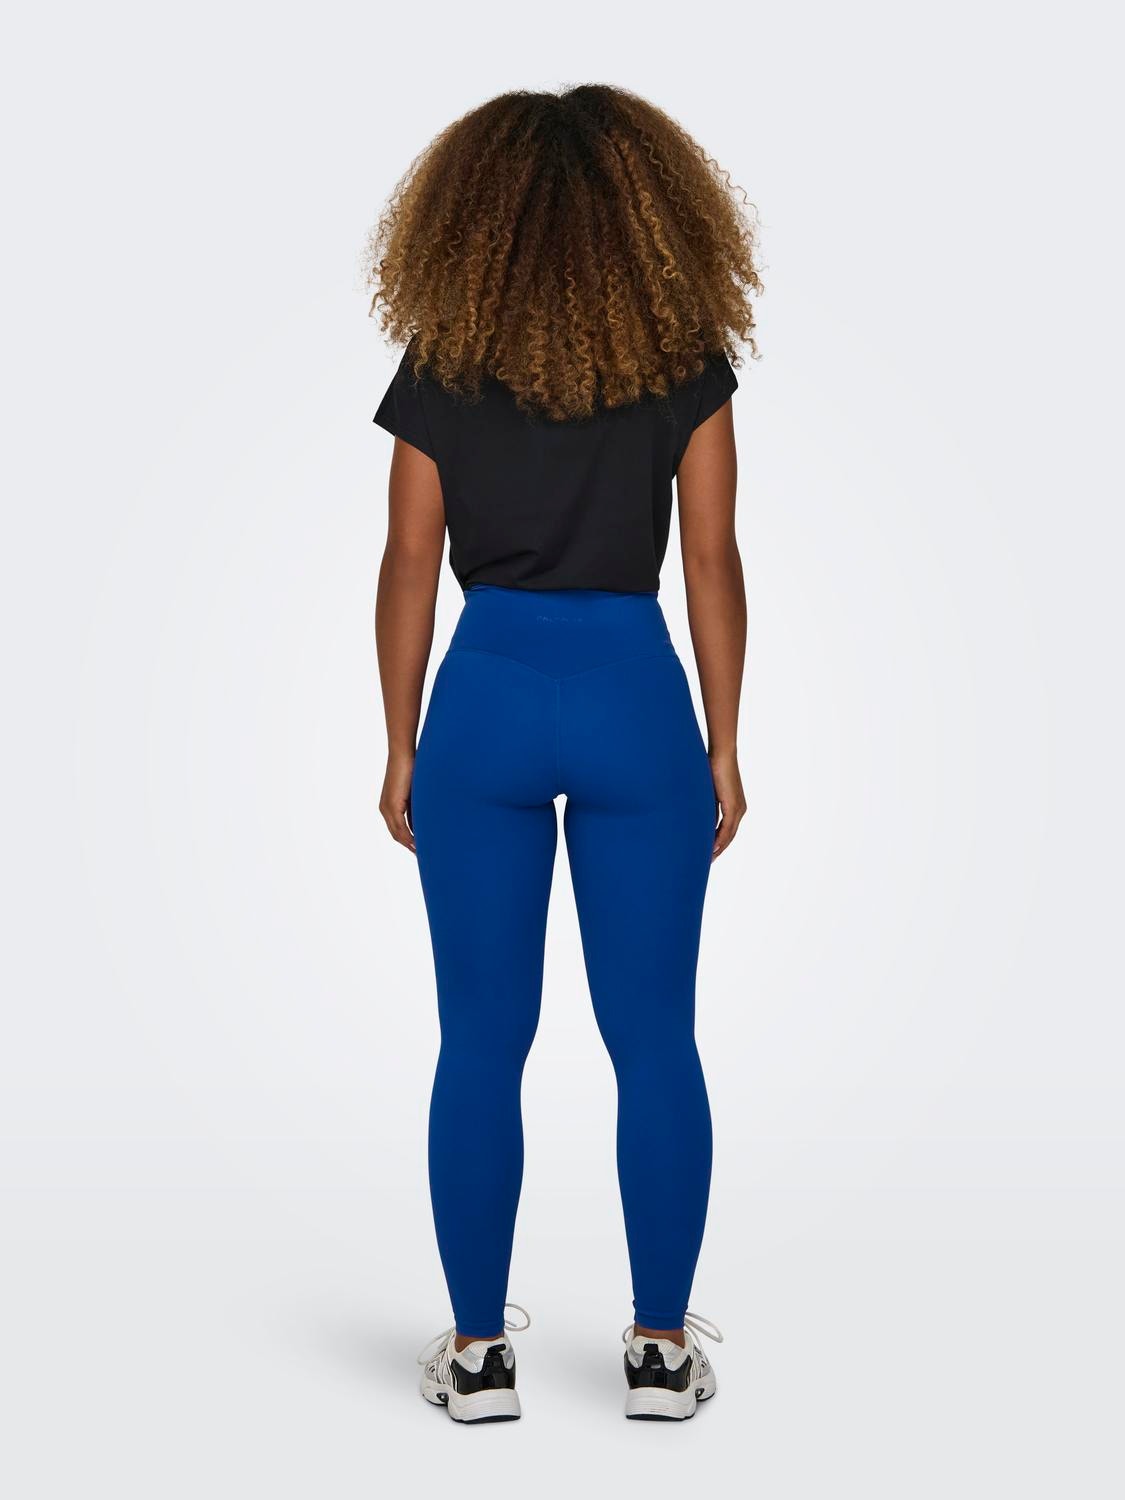 ONLY Tight Fit Superhøy midje Leggings -Surf the Web - 15303178